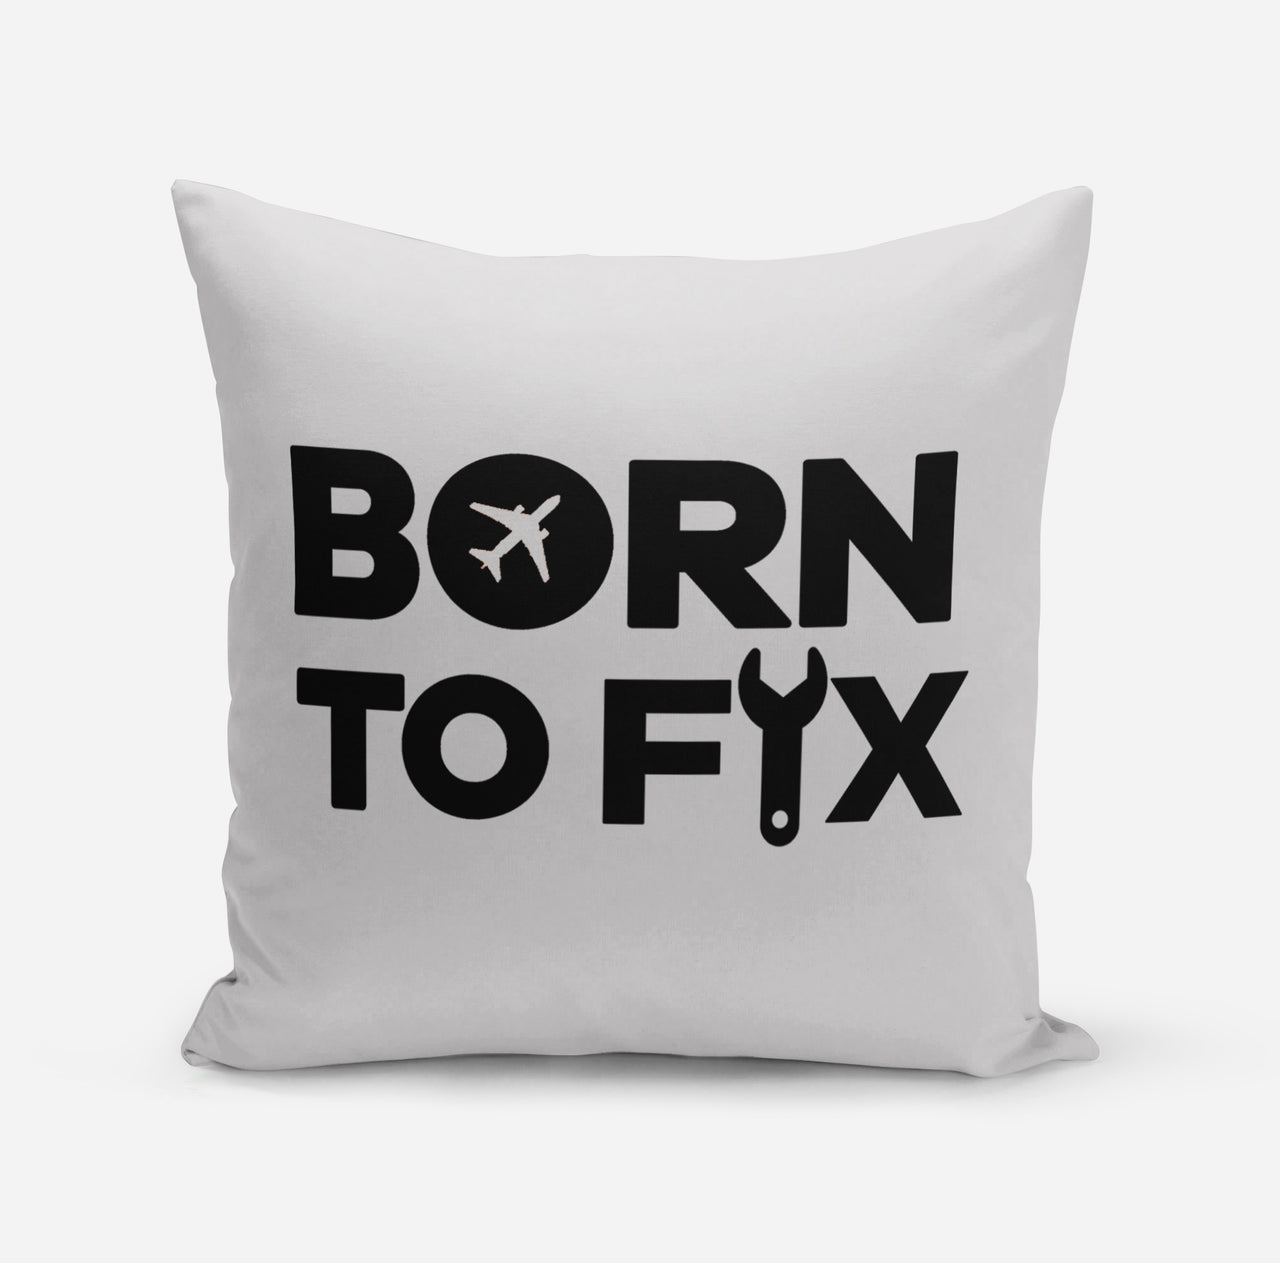 Born To Fix Airplanes Designed Pillows